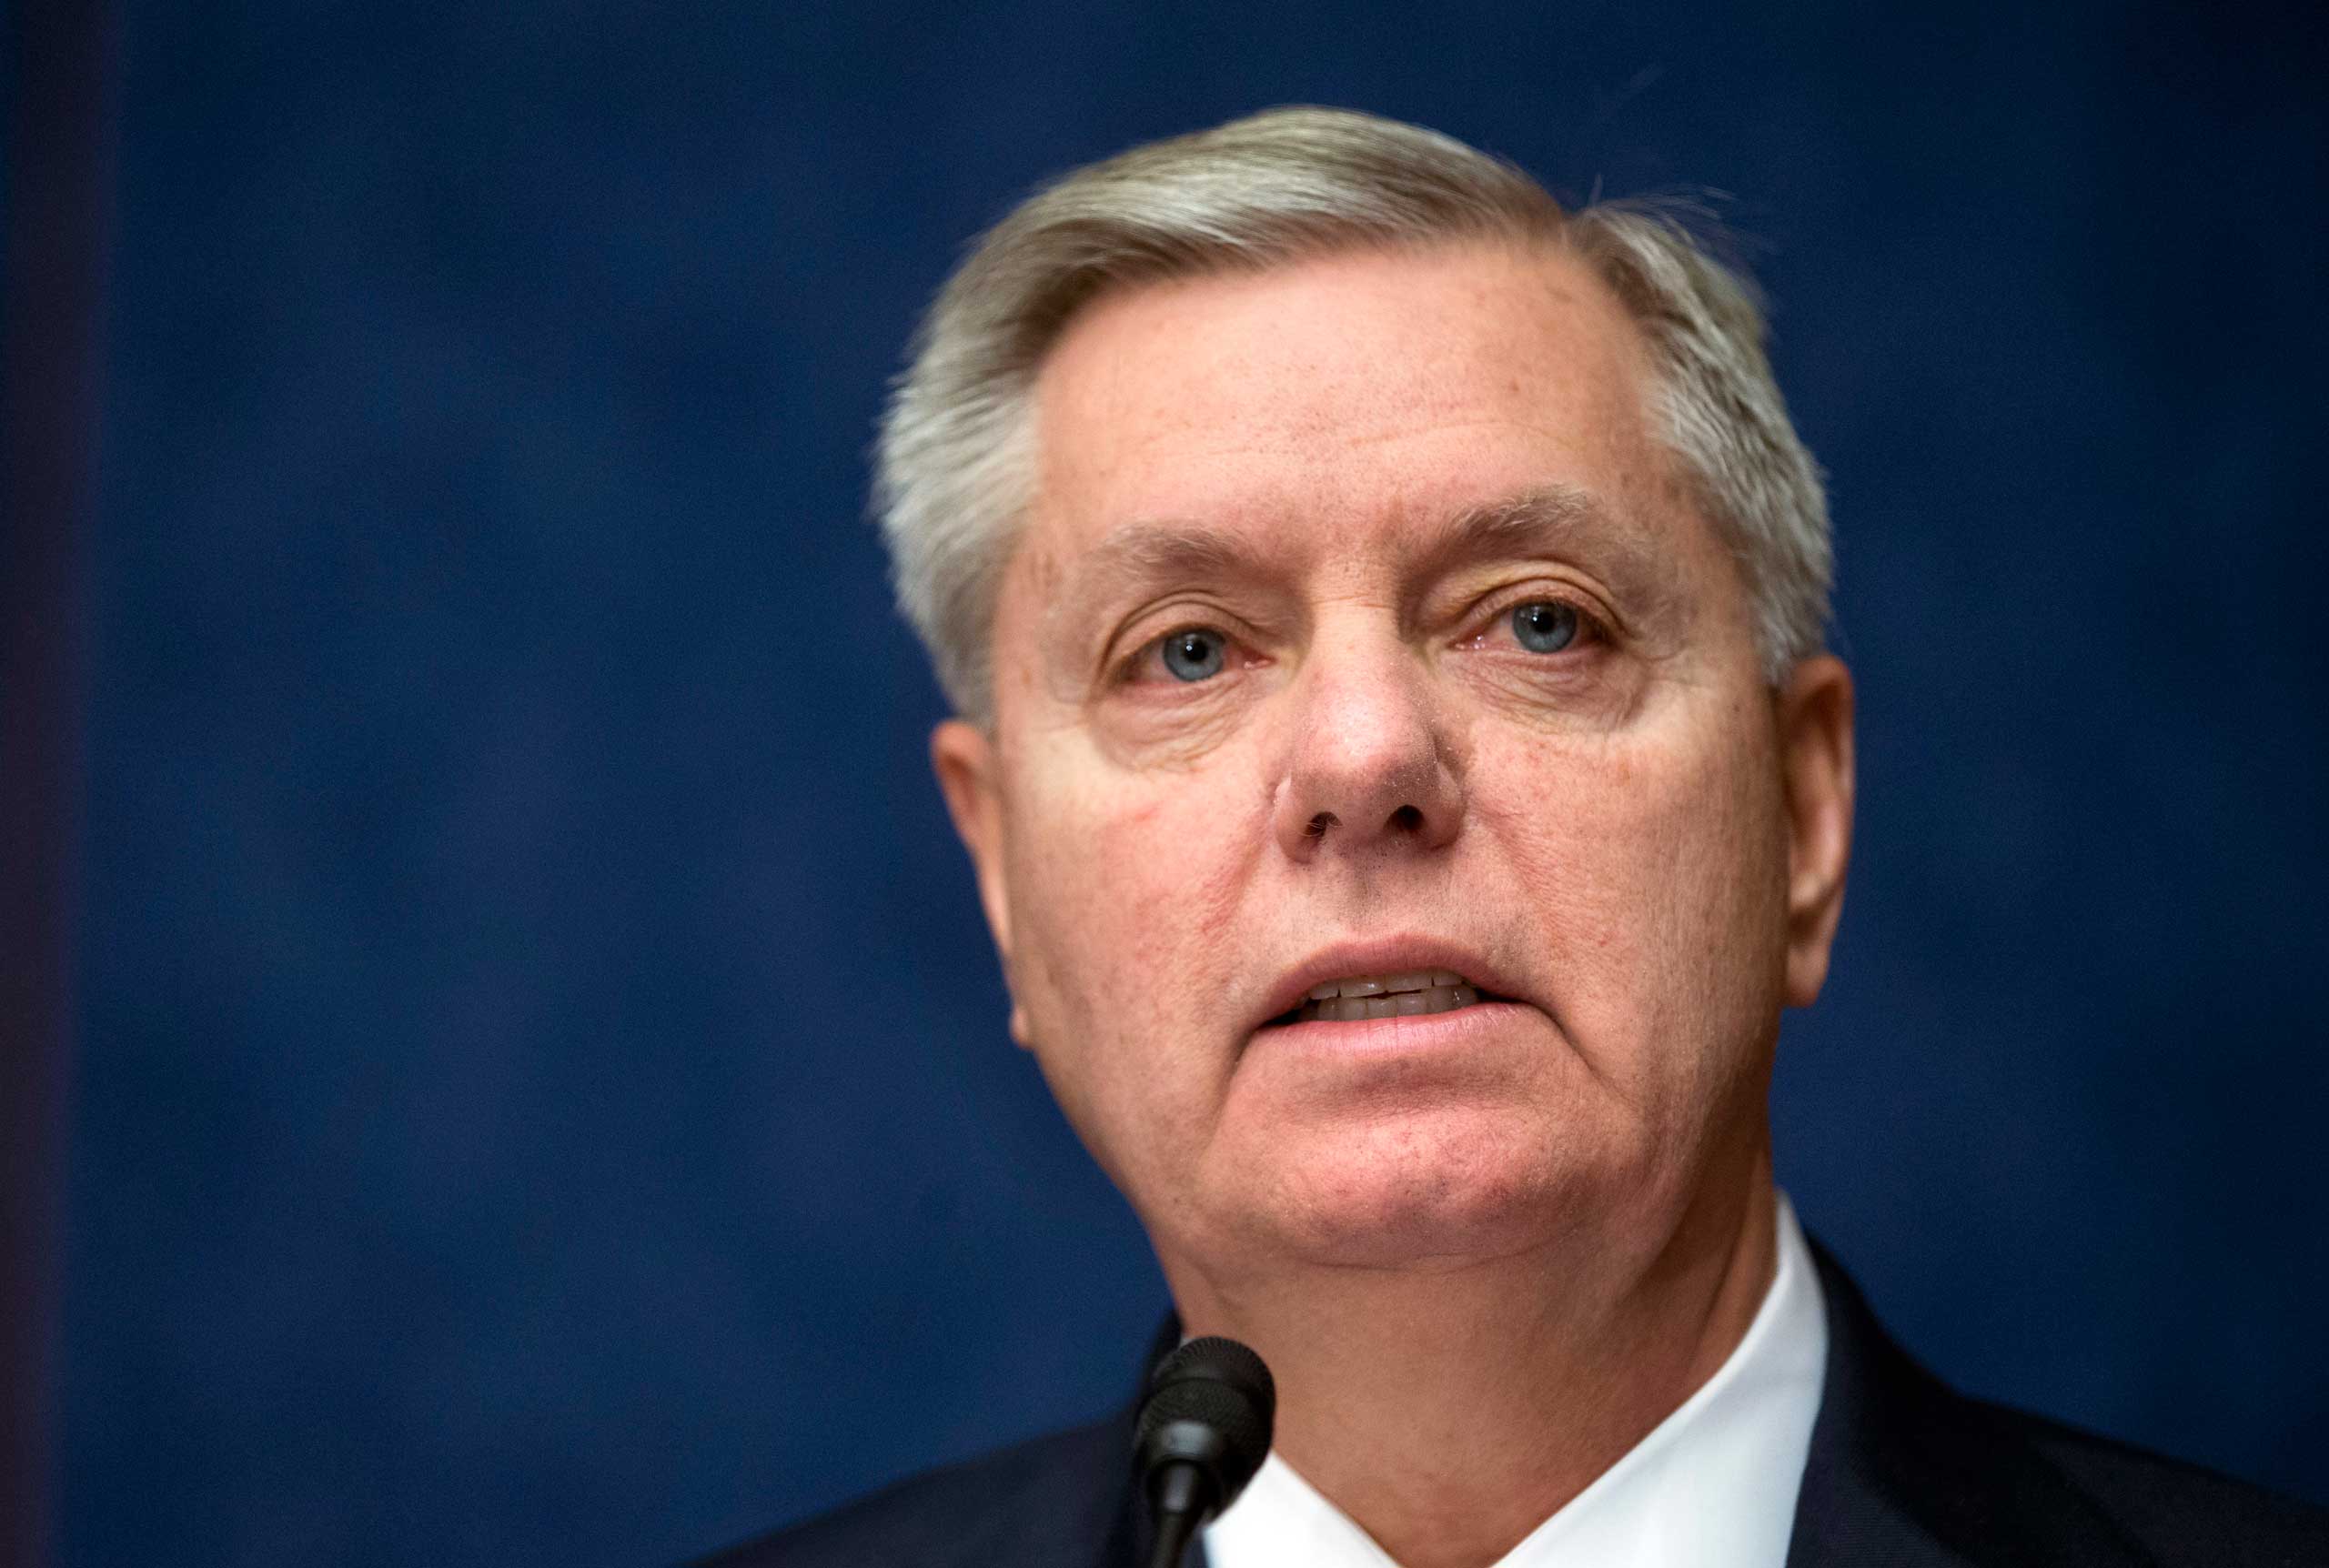 Sen. Lindsey Graham speaks during a discussion hosted by the American Action Forum and the Foreign Policy Initiative on Capitol Hill in Washington on March 12, 2015. (Manuel Balce Ceneta—AP)